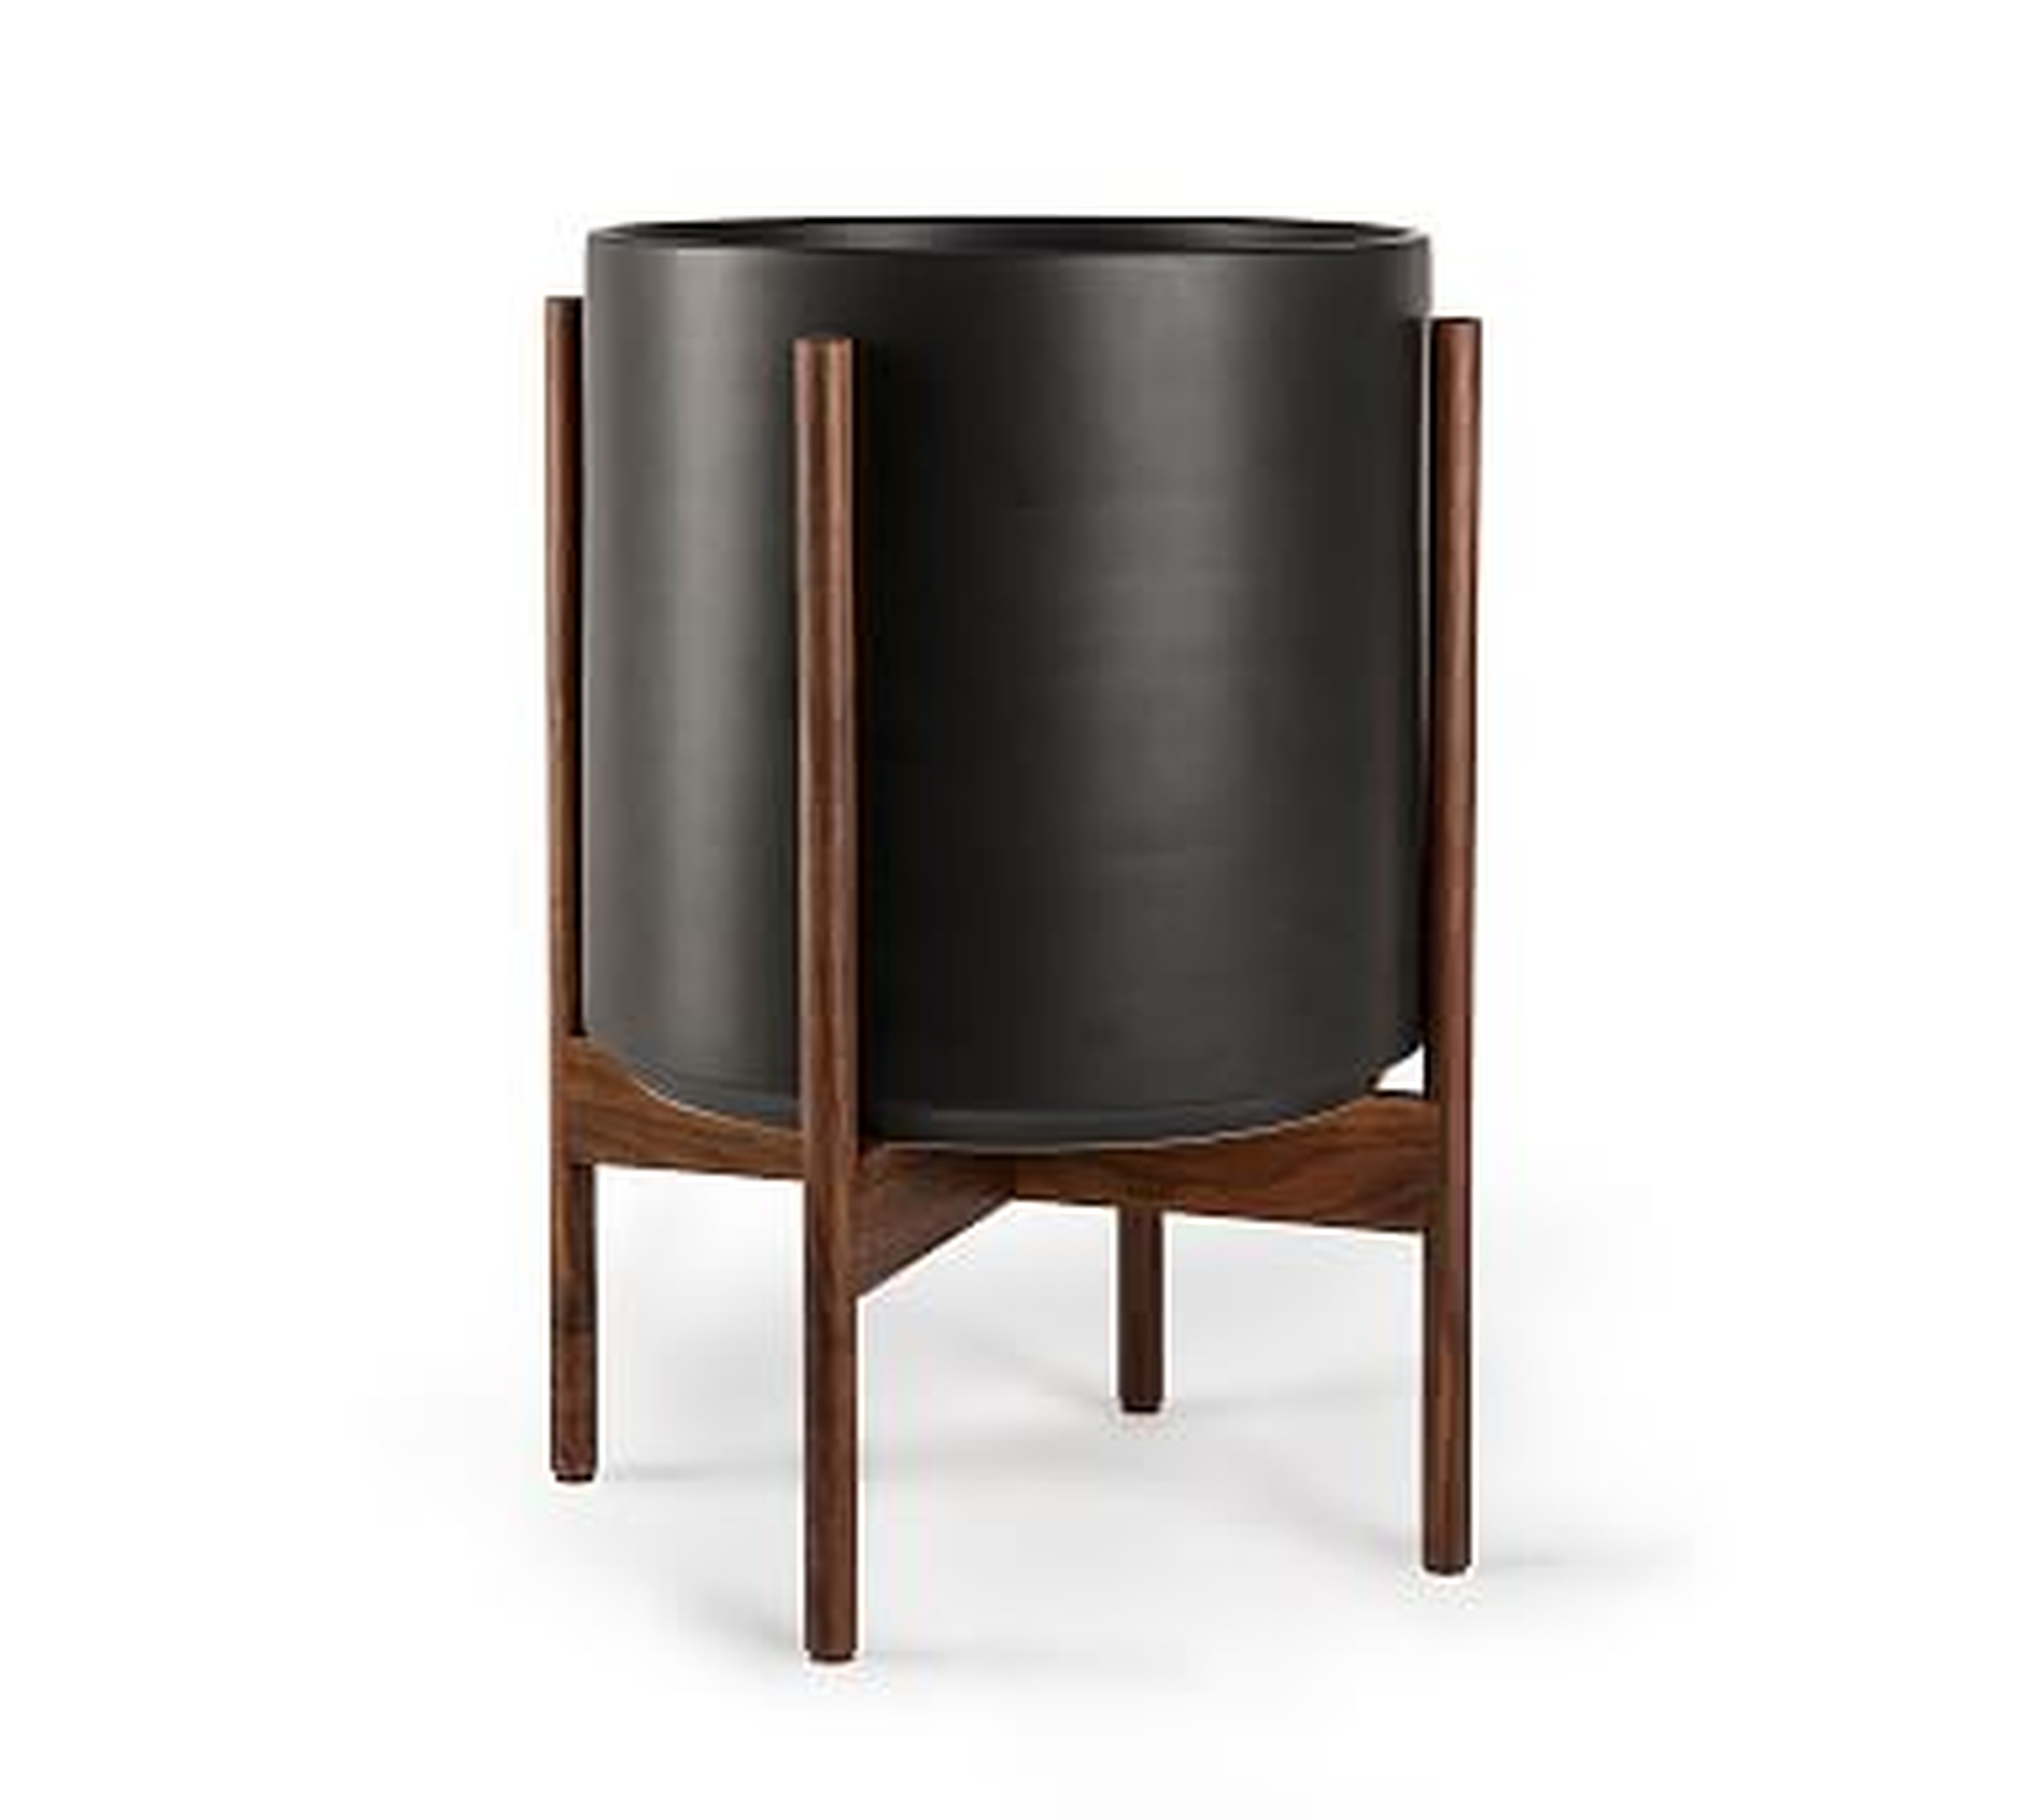 Modern Ceramic Planters with Wooden Stand, Black - Medium - Pottery Barn